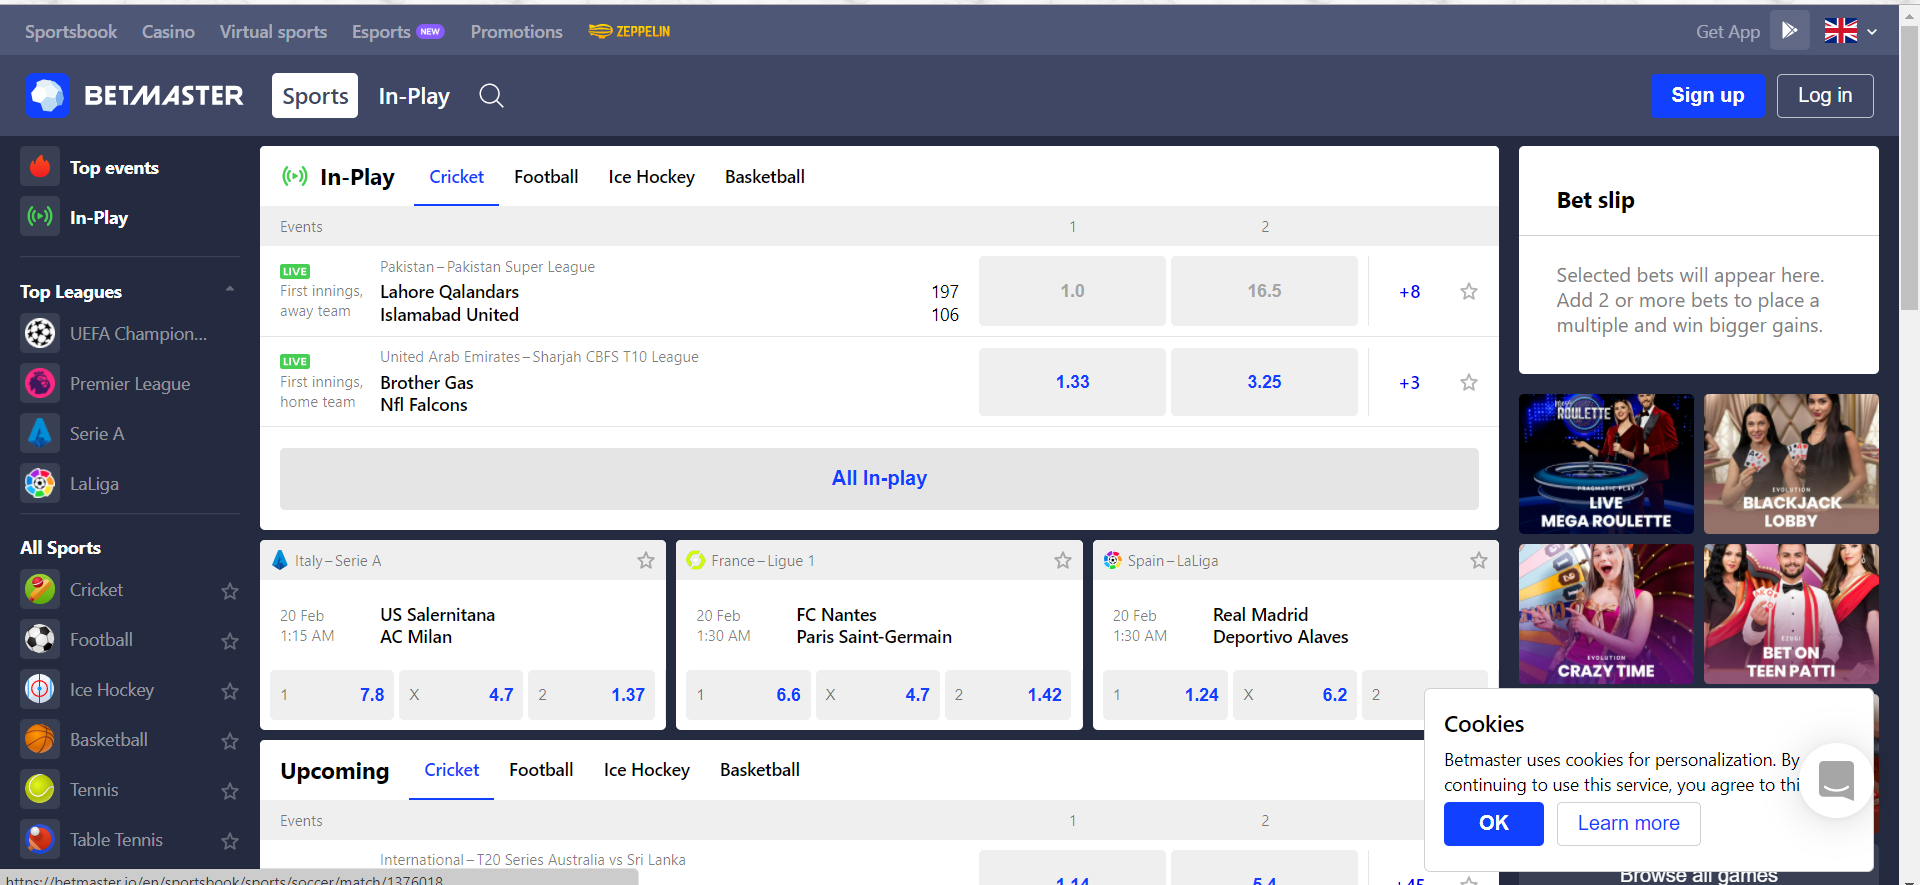 The sports page of Betmaster showing the different bets of cricket